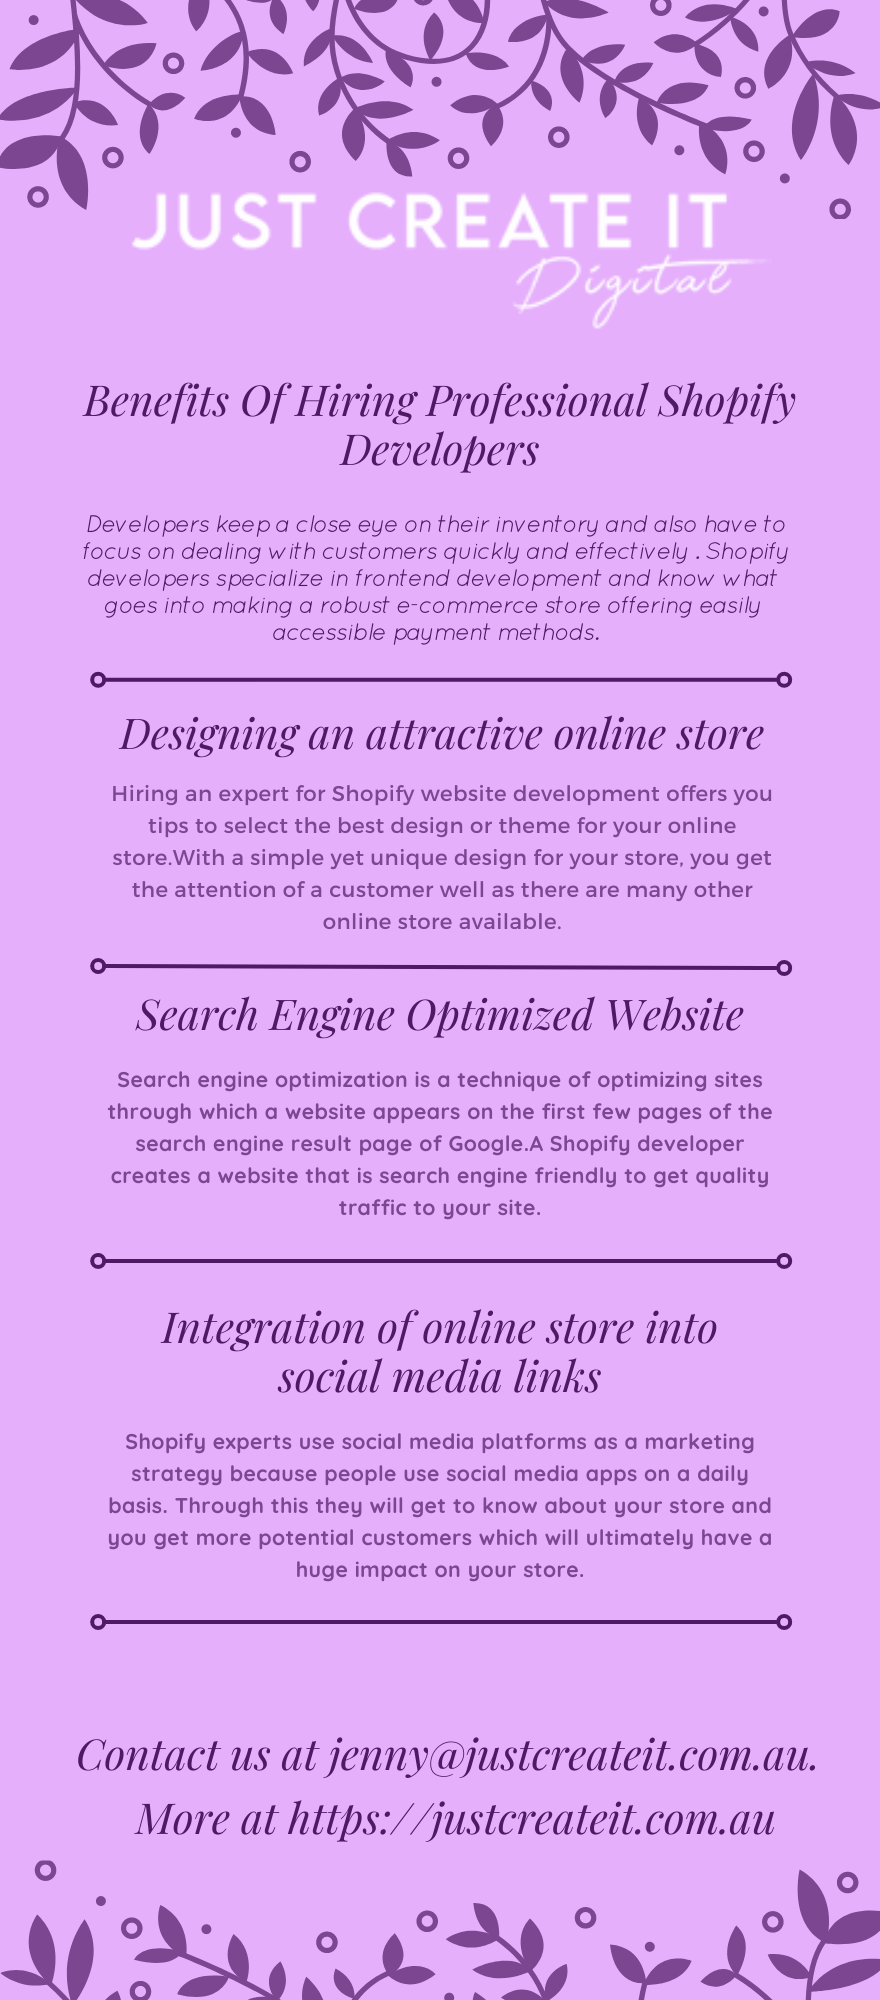 Just Create It ( Infographic).png  by JustCreateItDigital